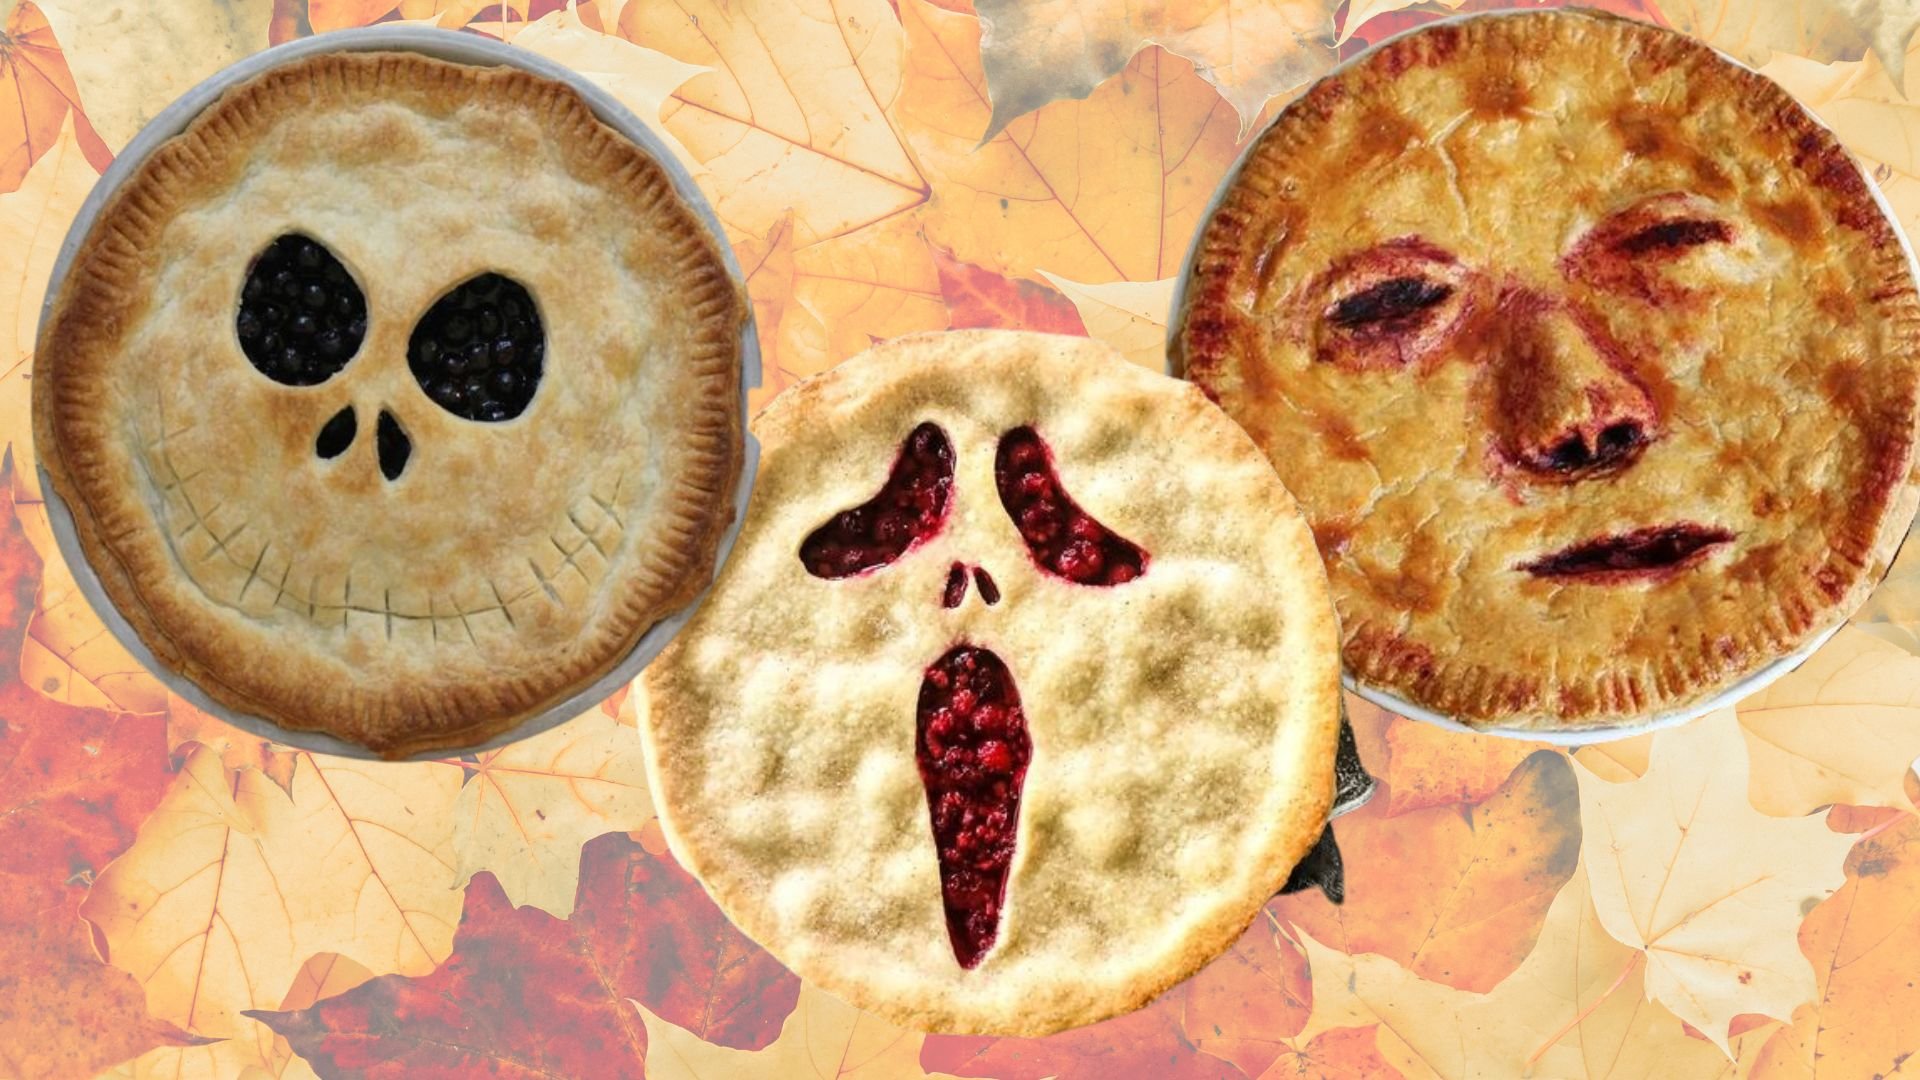 Turn your favourite dessert pie into a halloween masterpiece taking inspiration from The Night Before Christmas, Scream, or make your own frightening face.